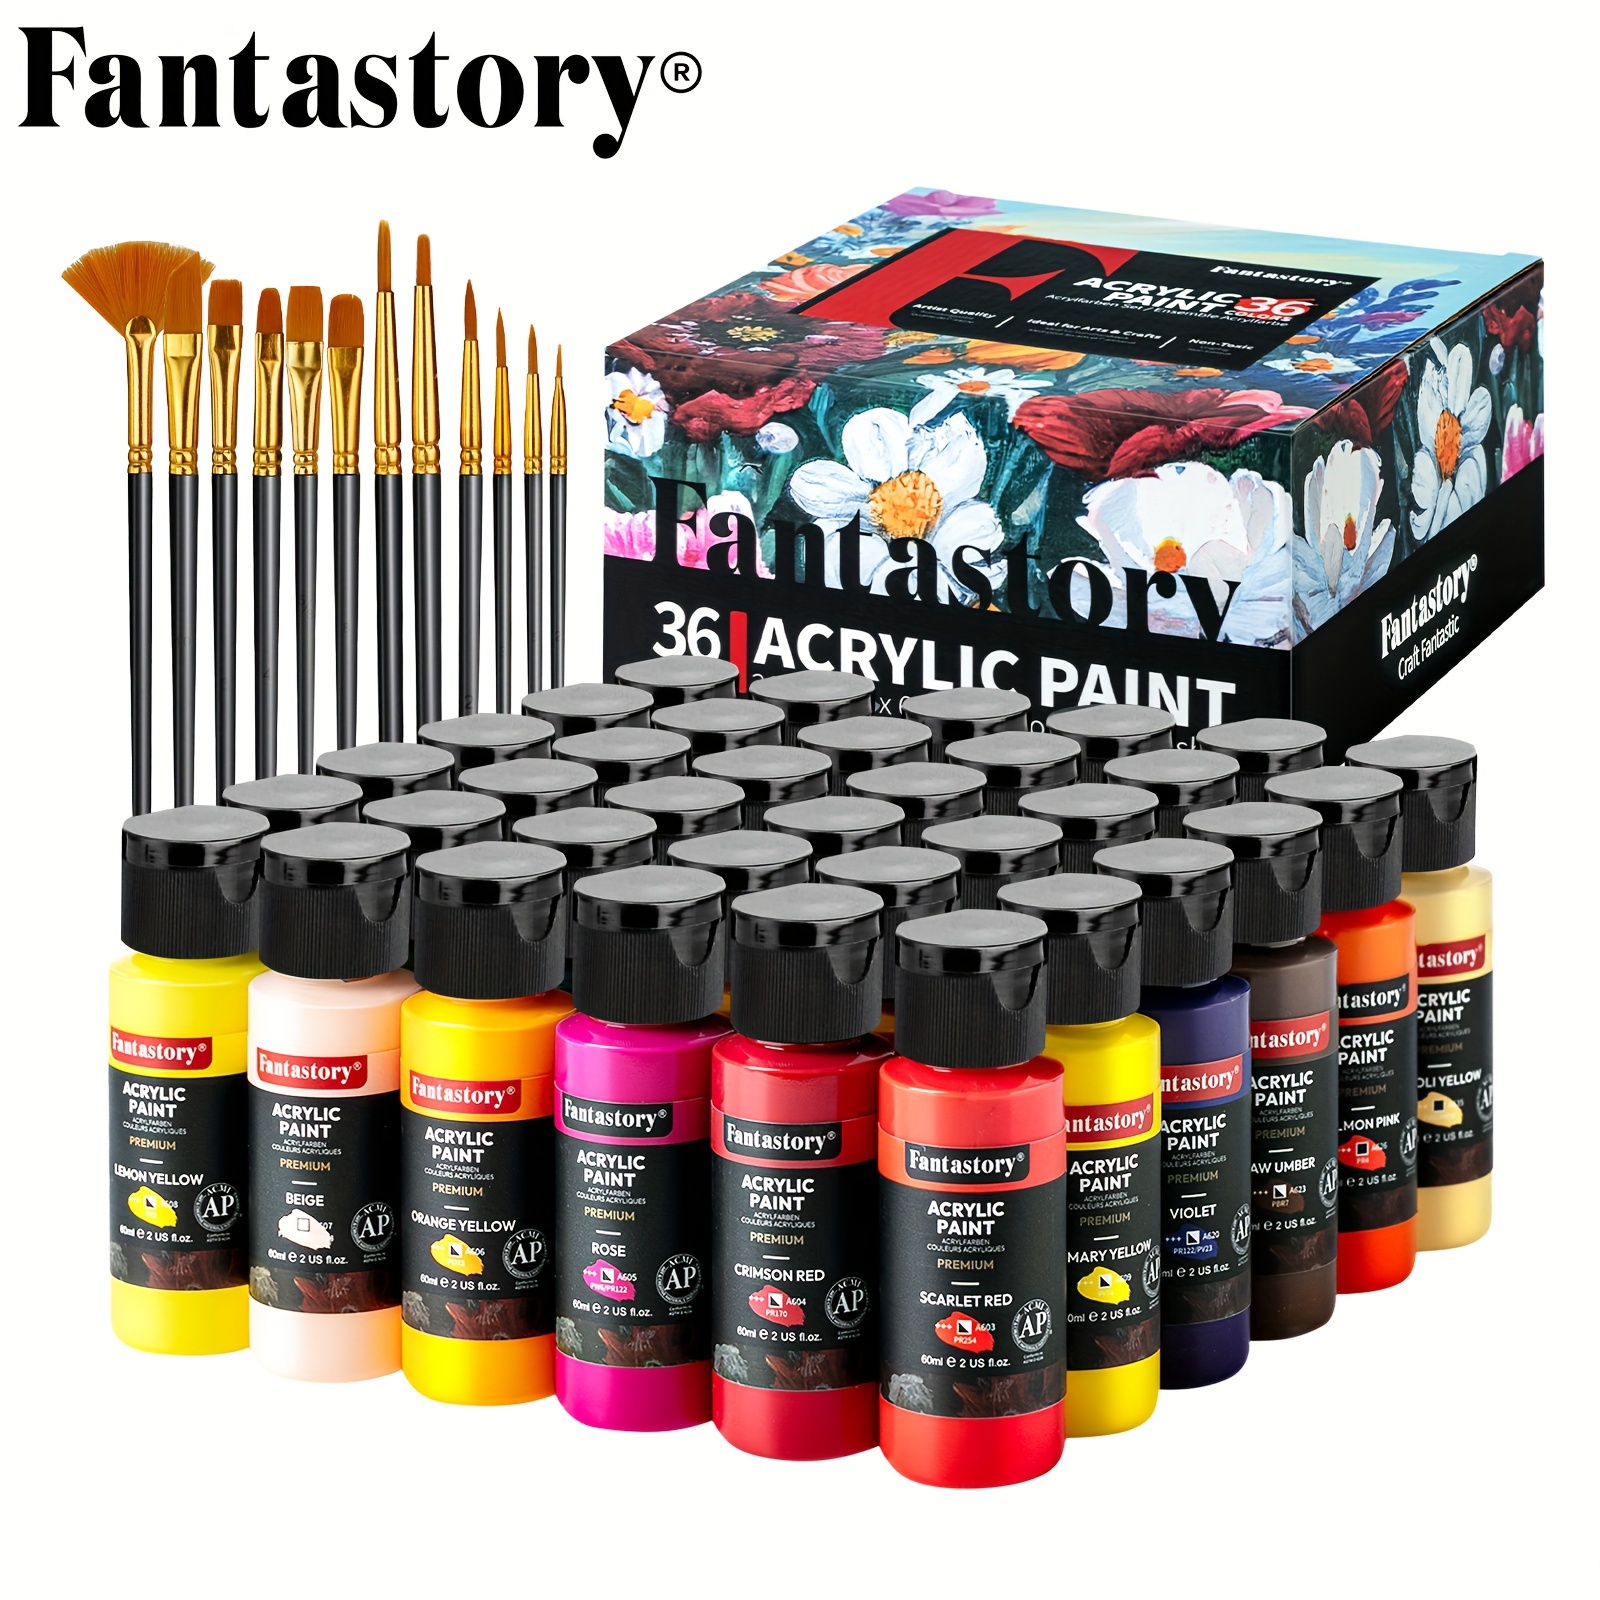 

Fantastory Acrylic Paint Set, 36classic Colors (2oz/60ml), Professional Craft Paint, Art Supplies Kit For Adults, Canvas/fabric/rock/glass/stone/ceramic/model/wood Painting With 12 Brushes